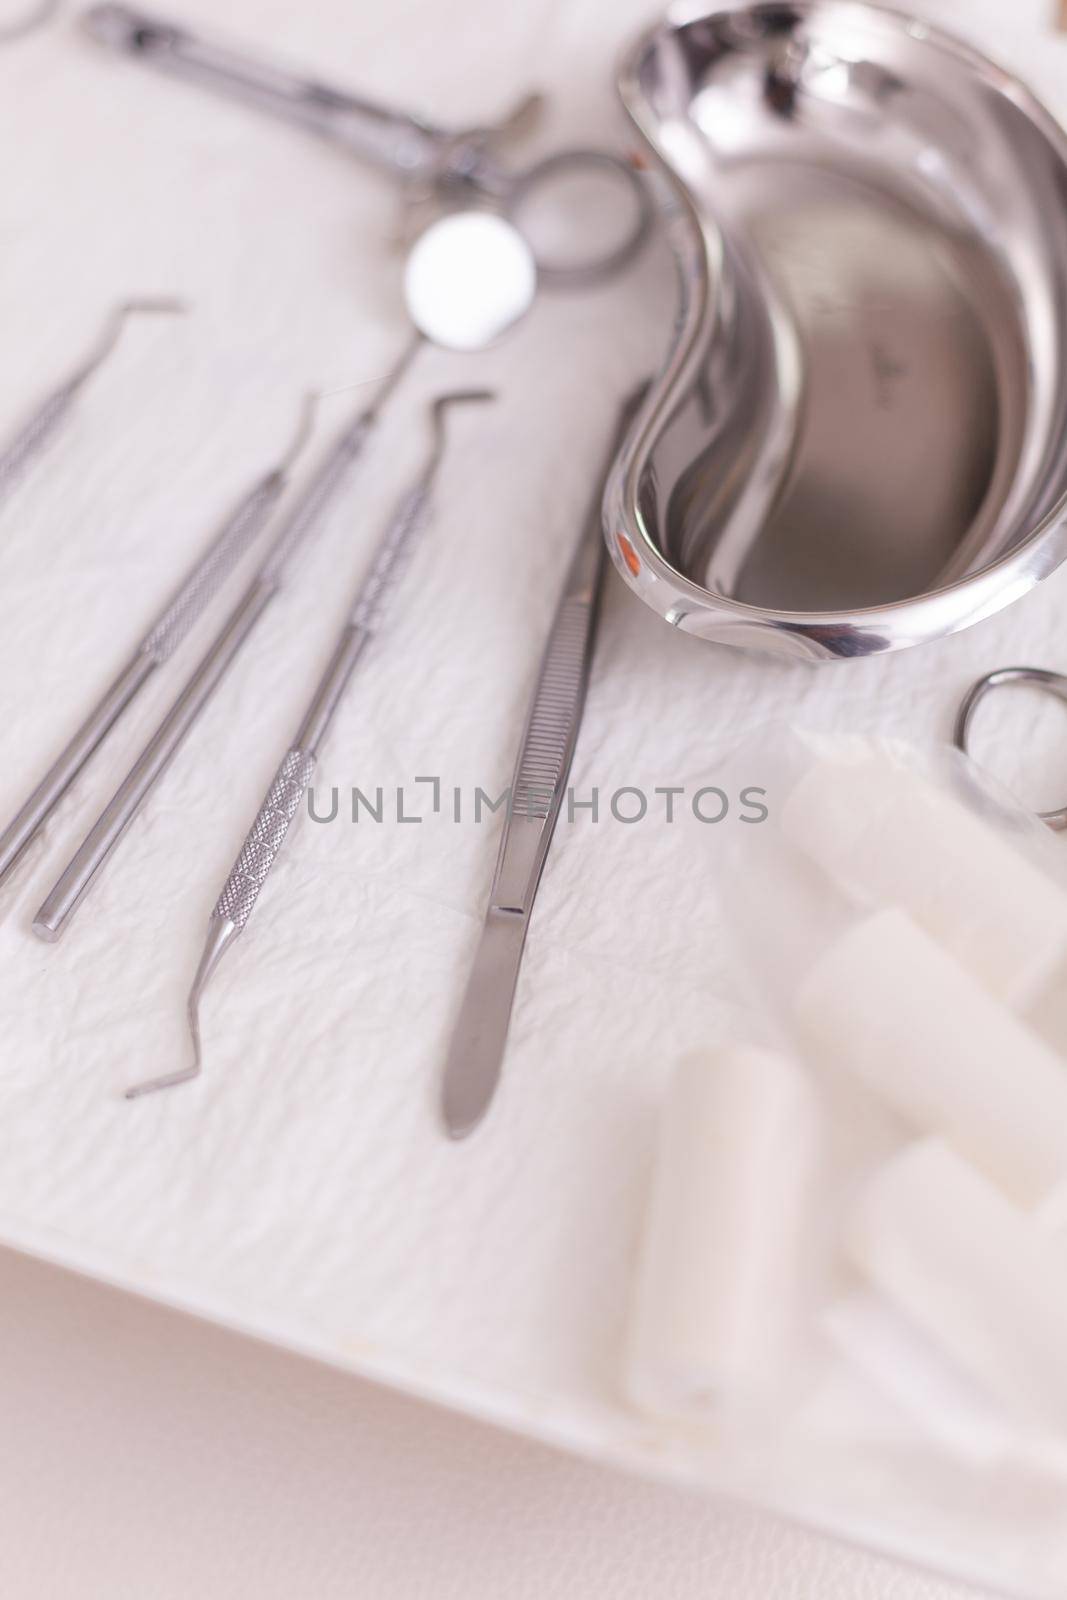 Close up of oral dental instruments ready for dentistry teeth surgery by DCStudio